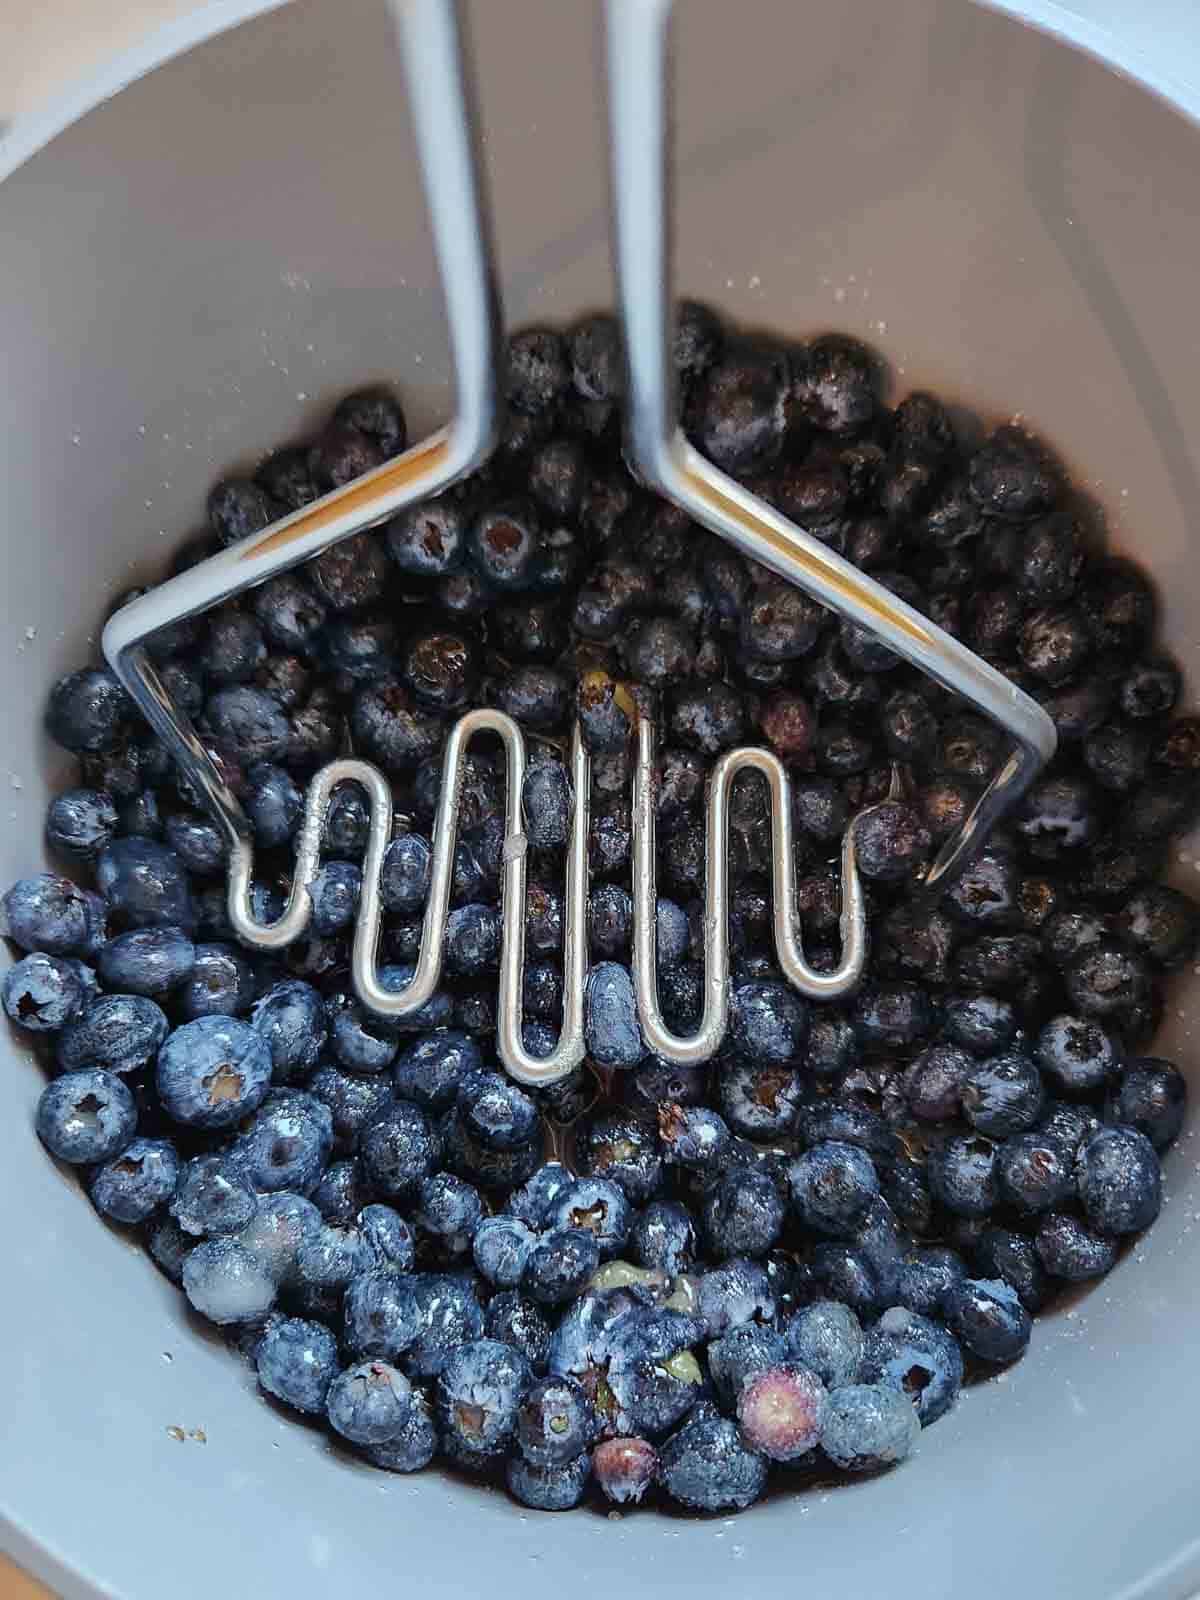 Mashing blueberries and sugar in a pot for making jam.